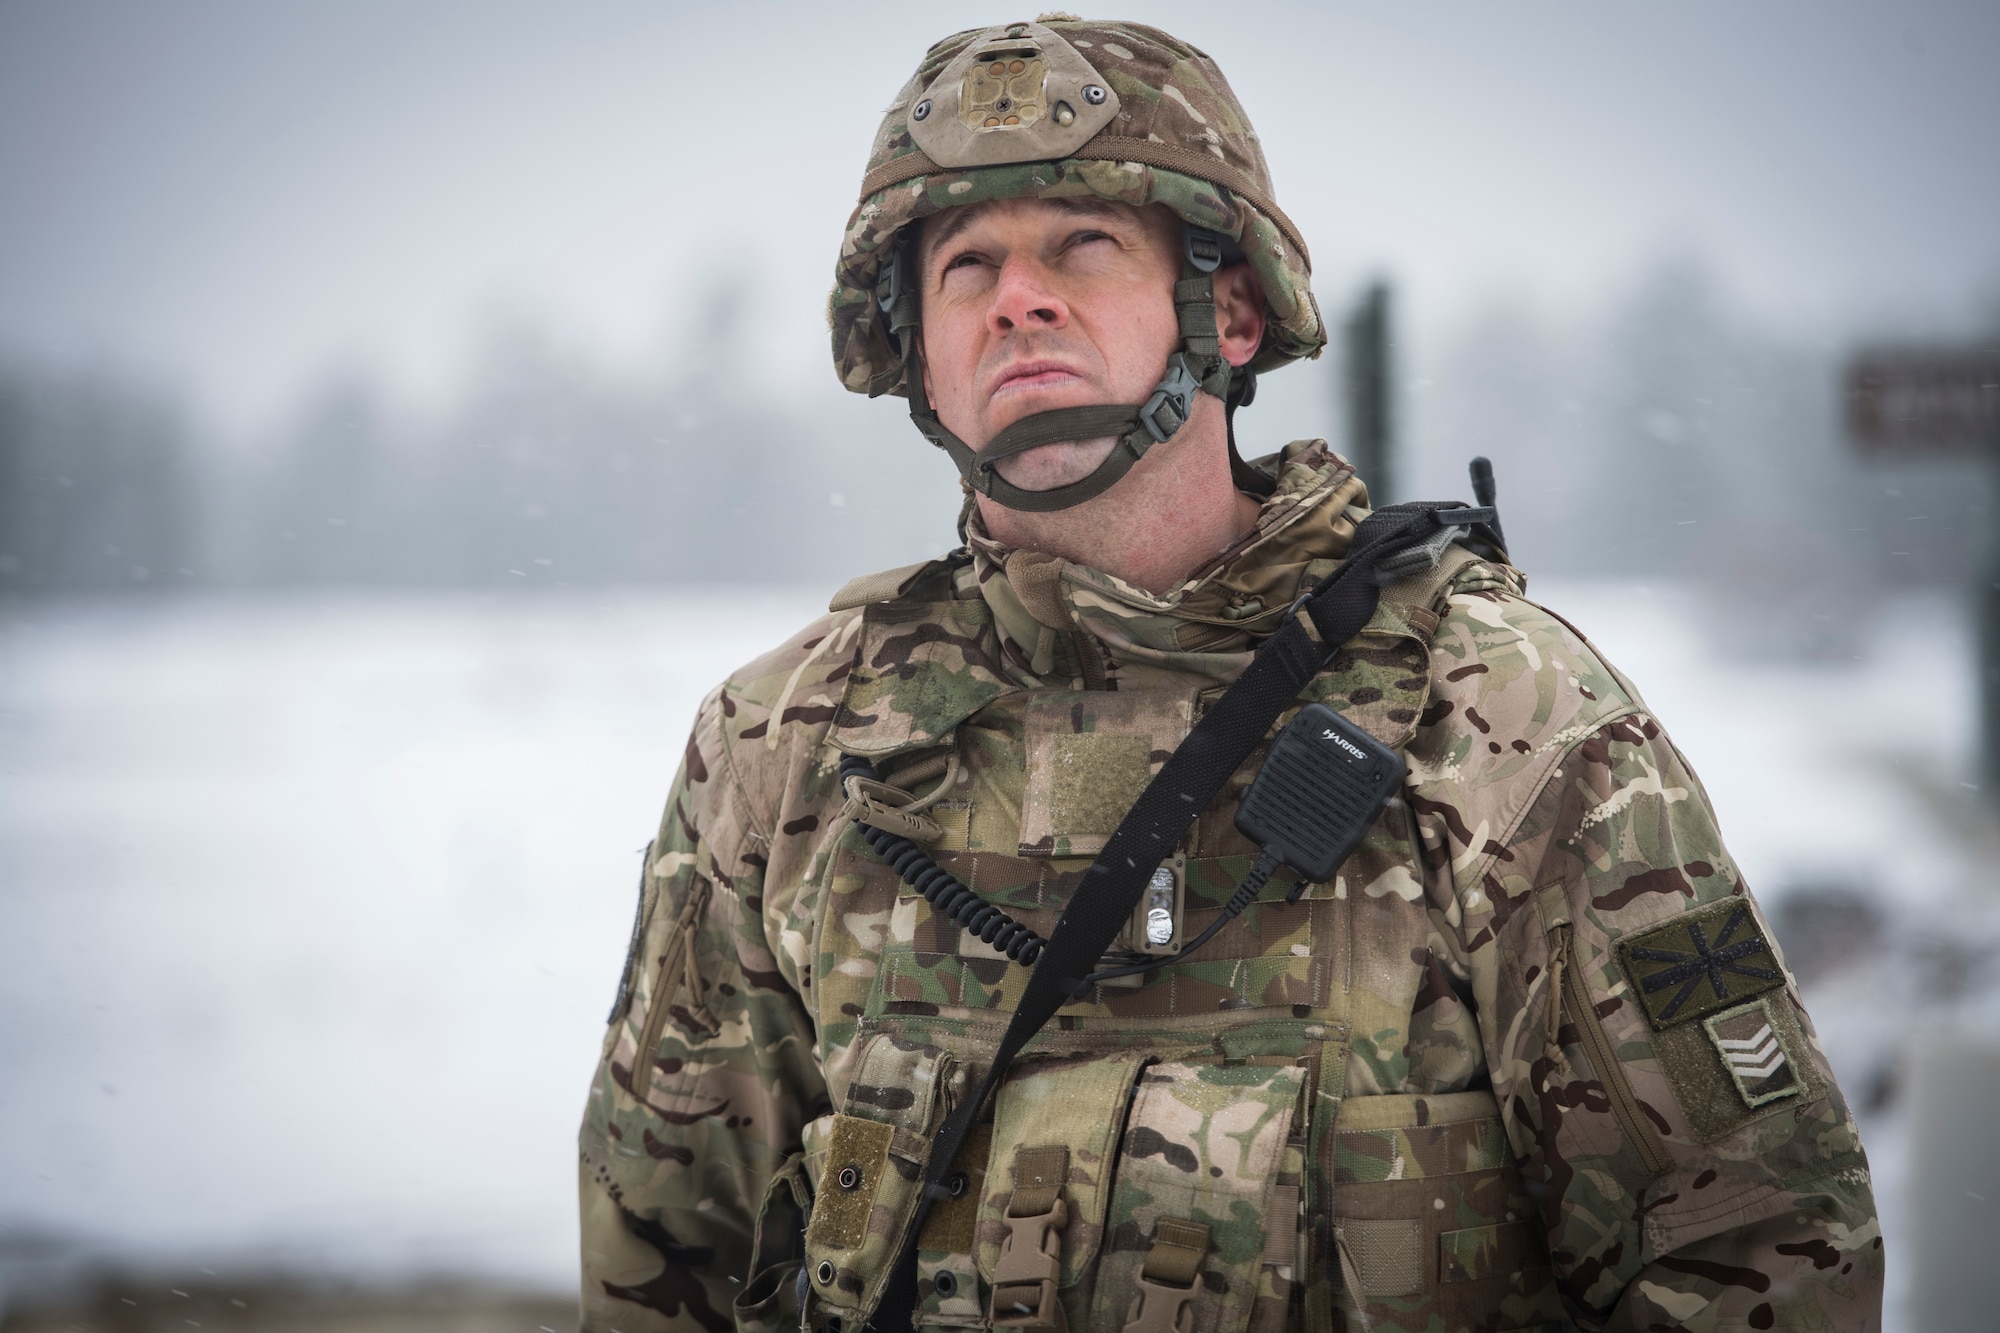 Tech. Sgt. Glenn Risebrow, 824th Base Defense Squadron flight chief, examines a defensive fighting position during a Mission Readiness Exercise, March 13, 2018, at Joint Base McGuire-Dix-Lakehurst, N.J. Evaluators tested the 824th BDS from Moody Air Force Base, Ga., and the 105th Security Forces Squadron from Stewart Air National Guard Base, N.Y., to ensure their combat readiness. (U.S. Air Force photo by Senior Airman Janiqua P. Robinson)